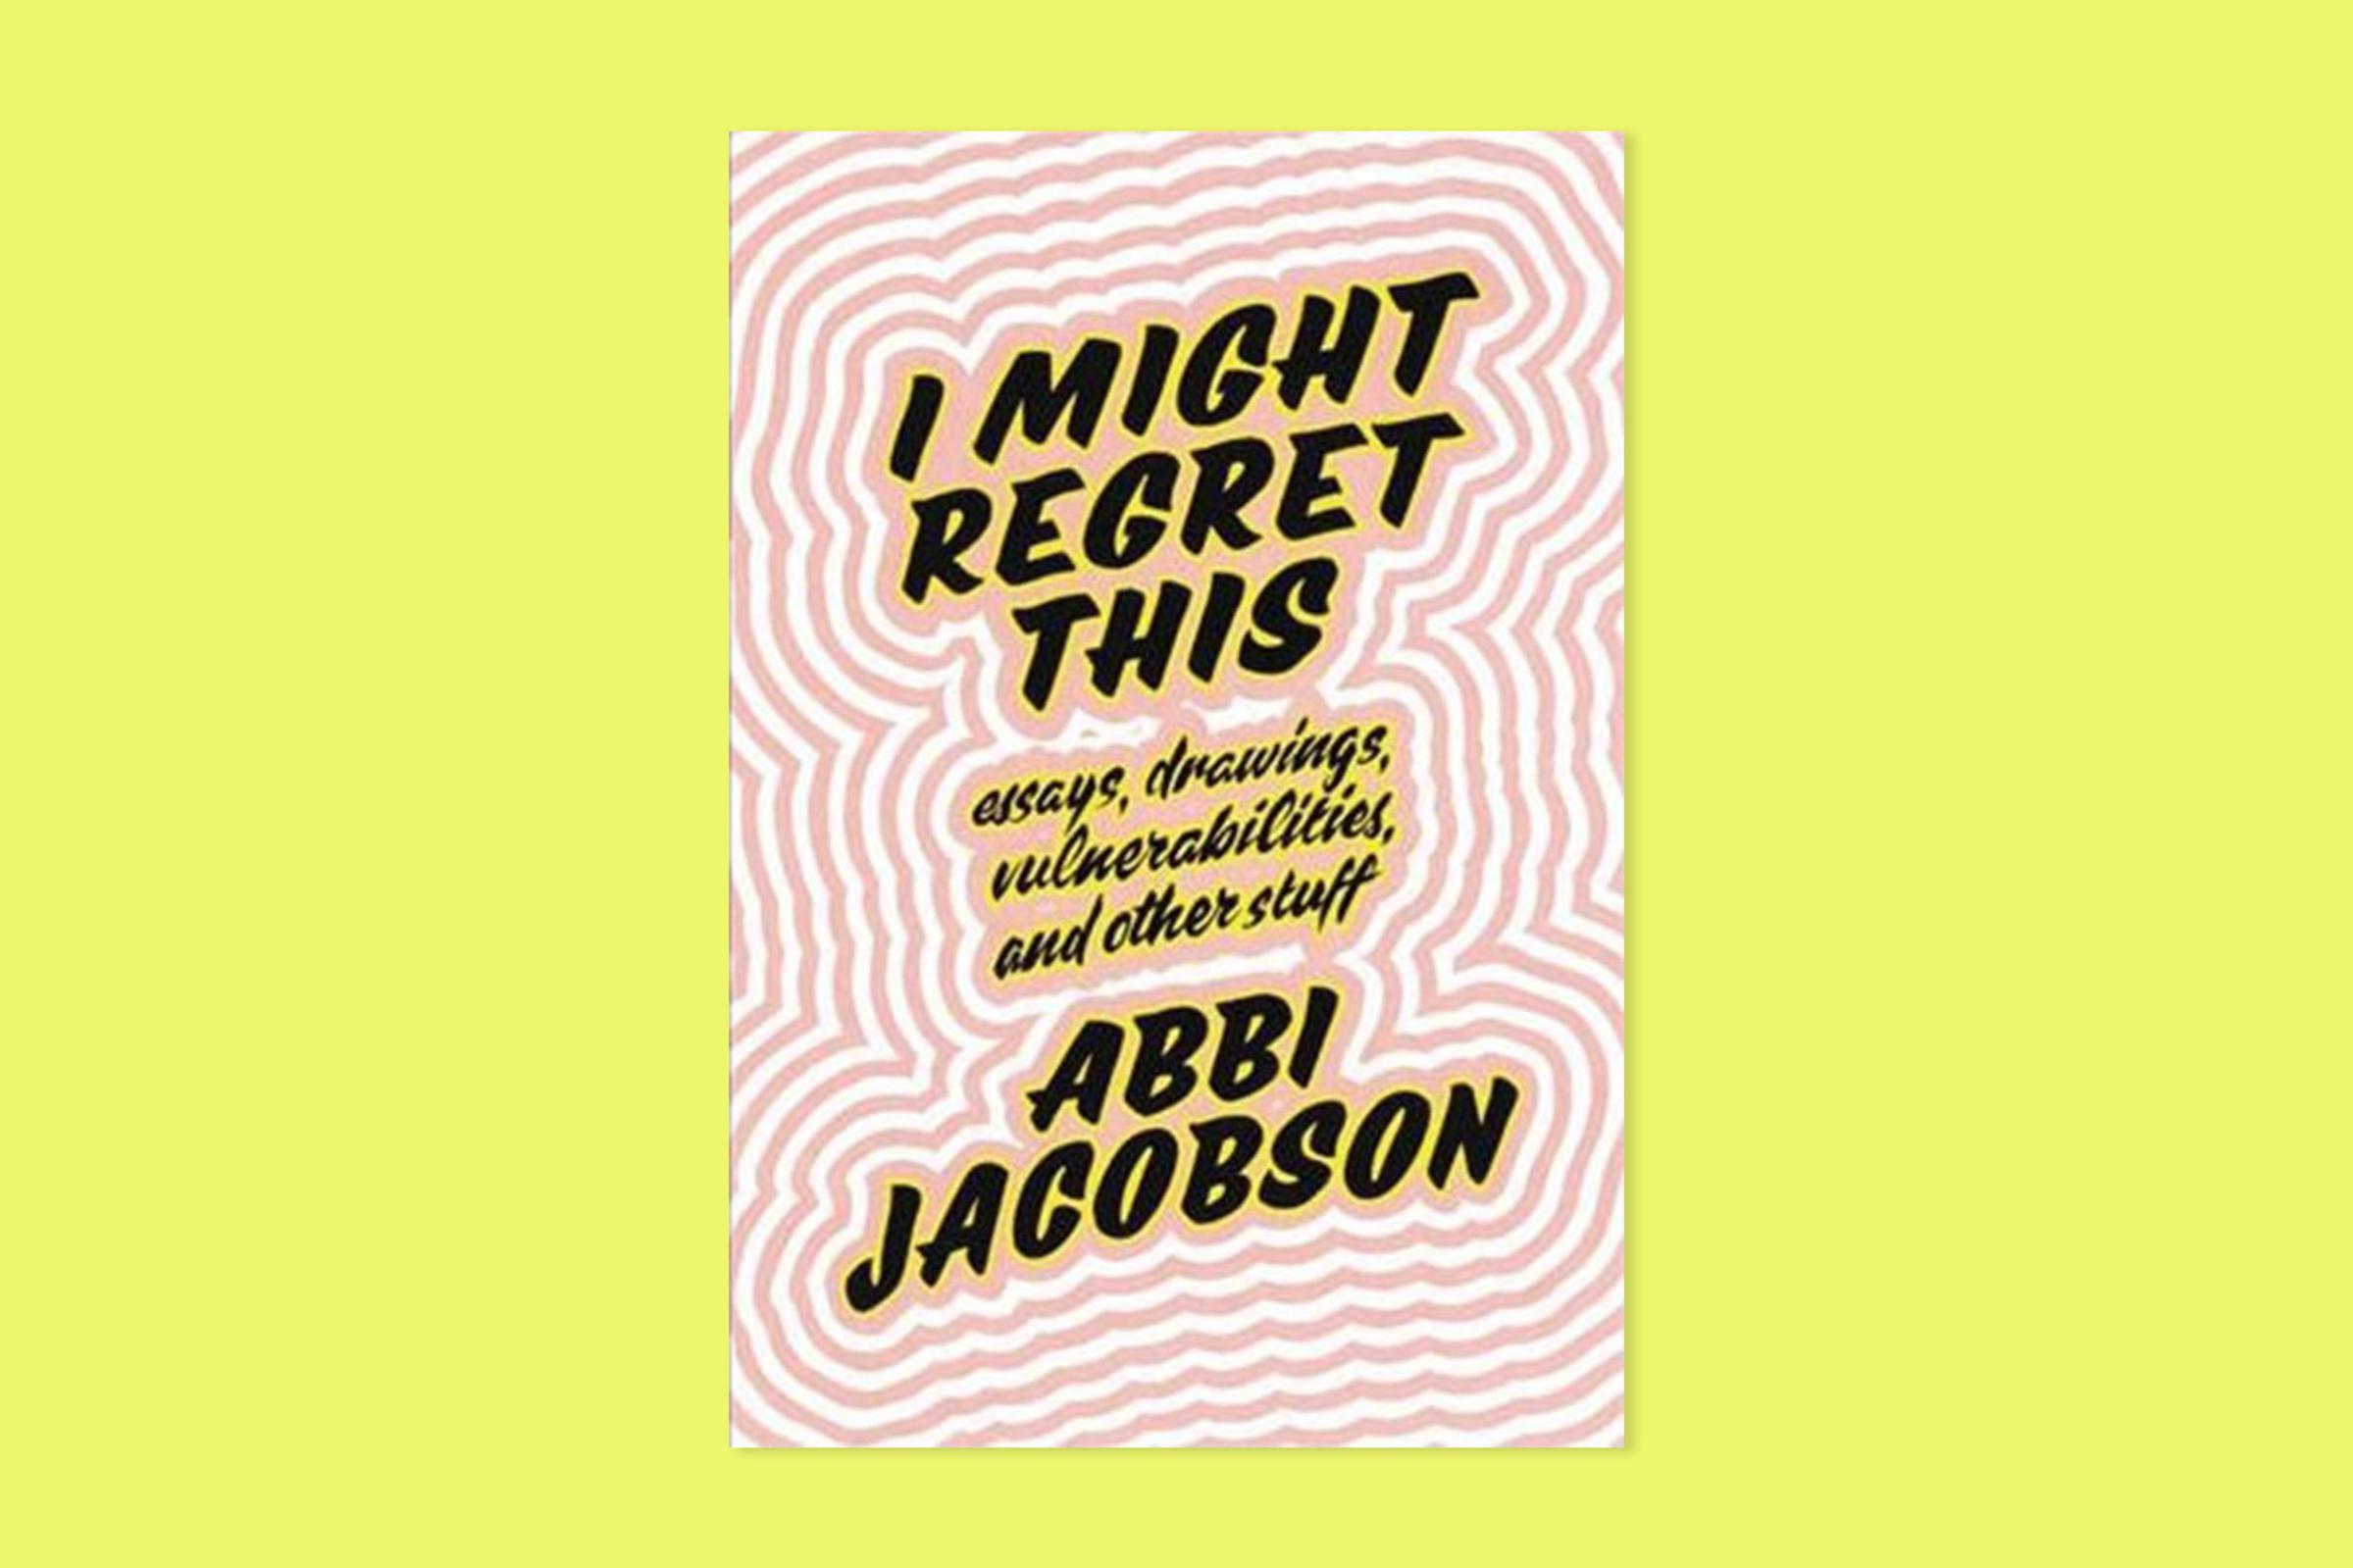 I Might Regret This by Abbi Jacobson